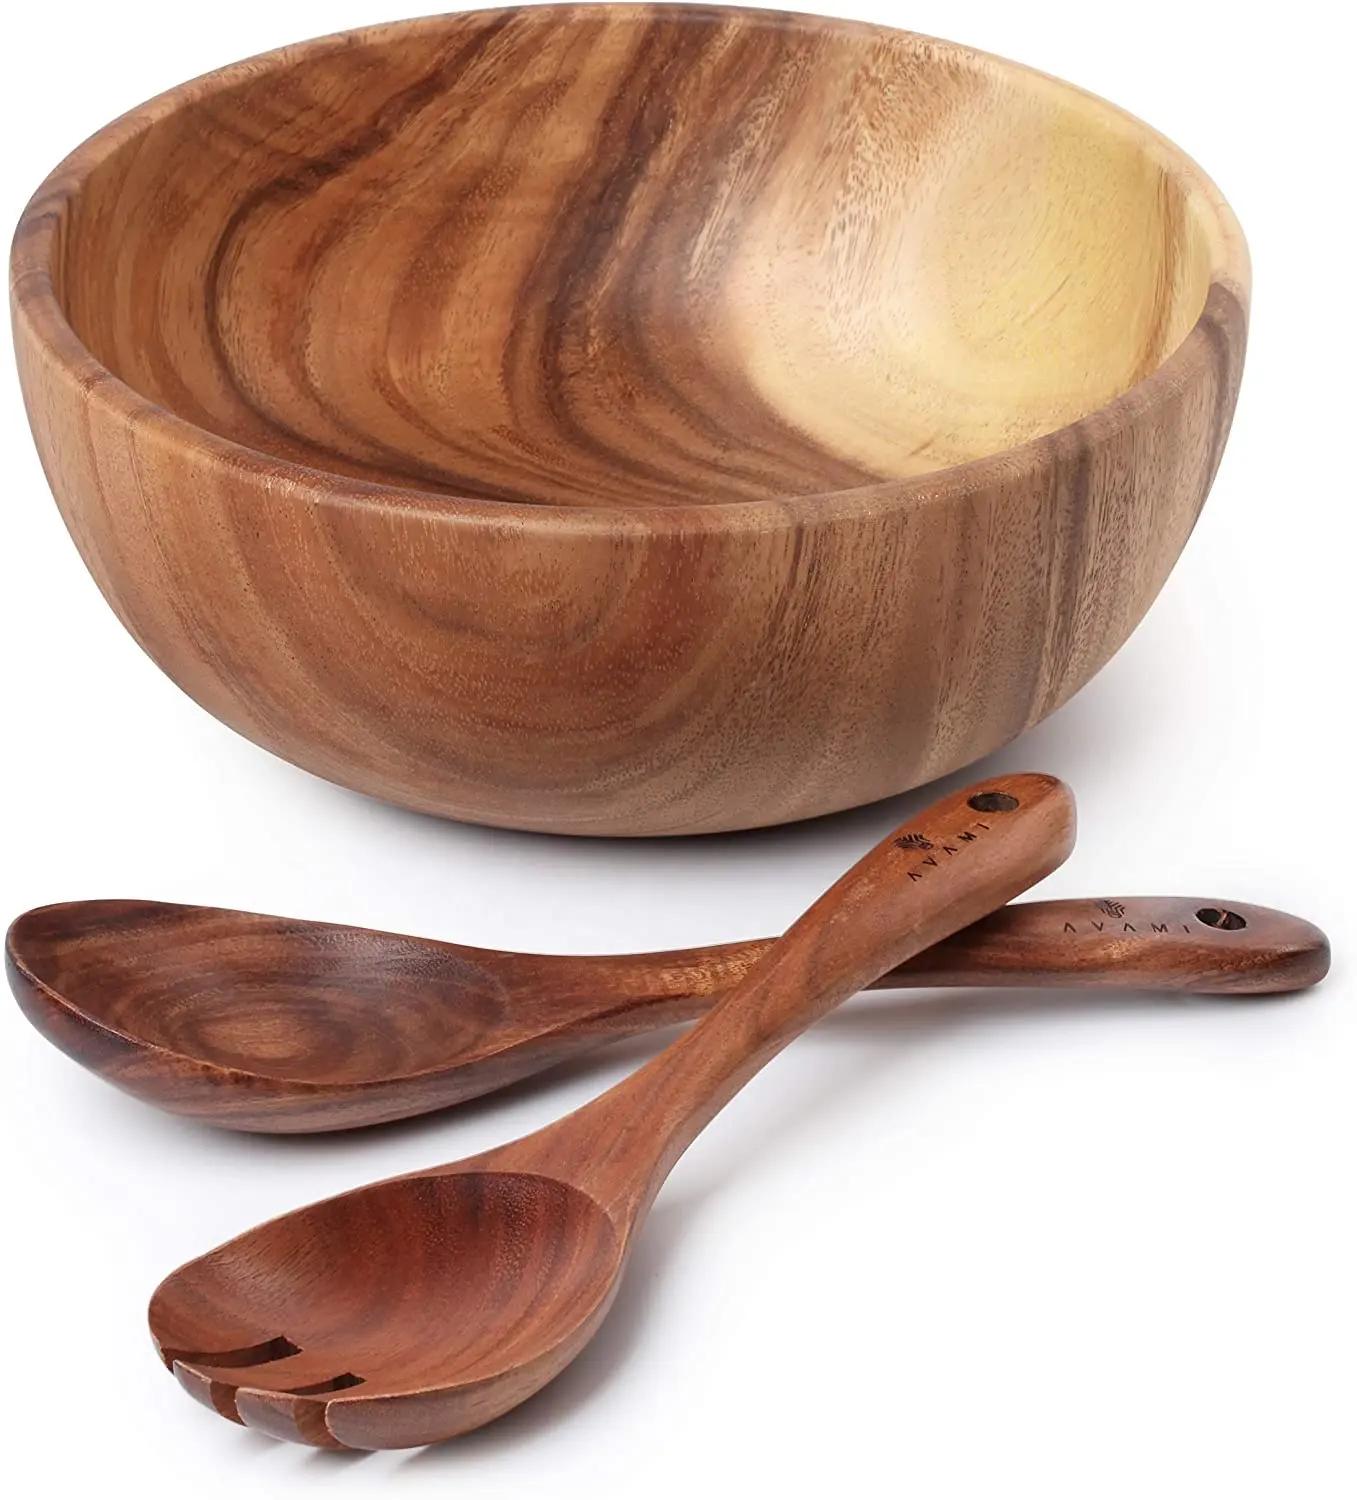 Farm and Garden delightful nest of 3 oval contemporary rustic wooden serving or display bowls carved from the roots of giant teak trees